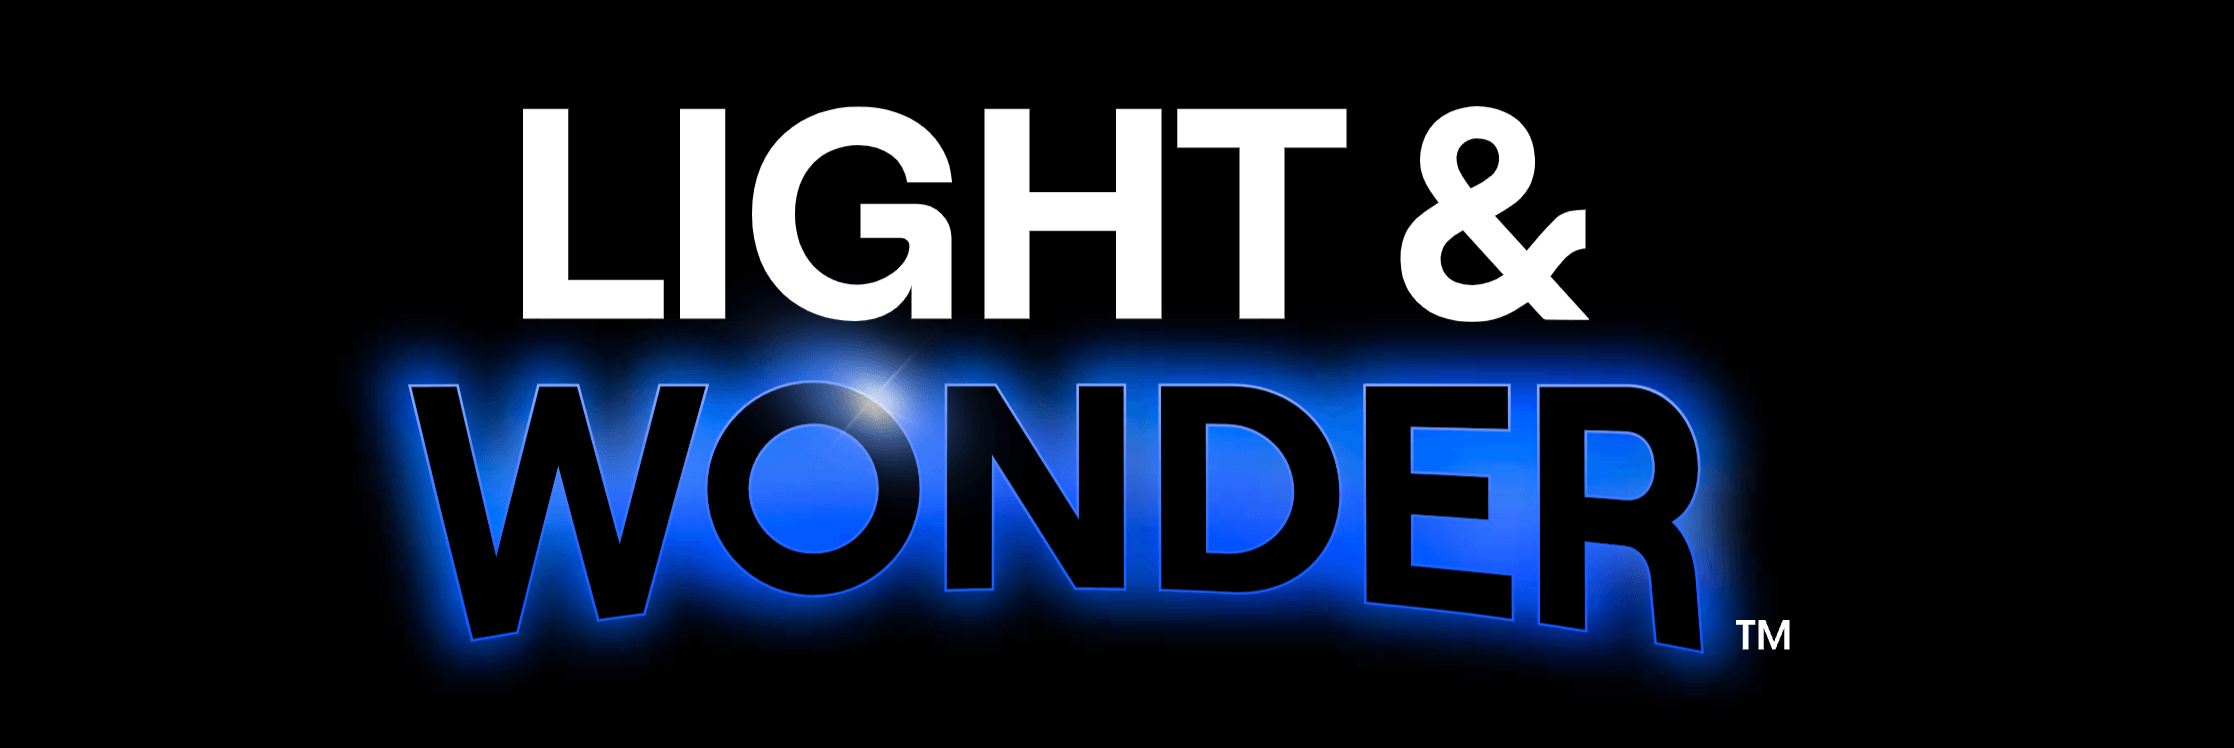 Light & Wonder CEO announces streamlined business growth plans